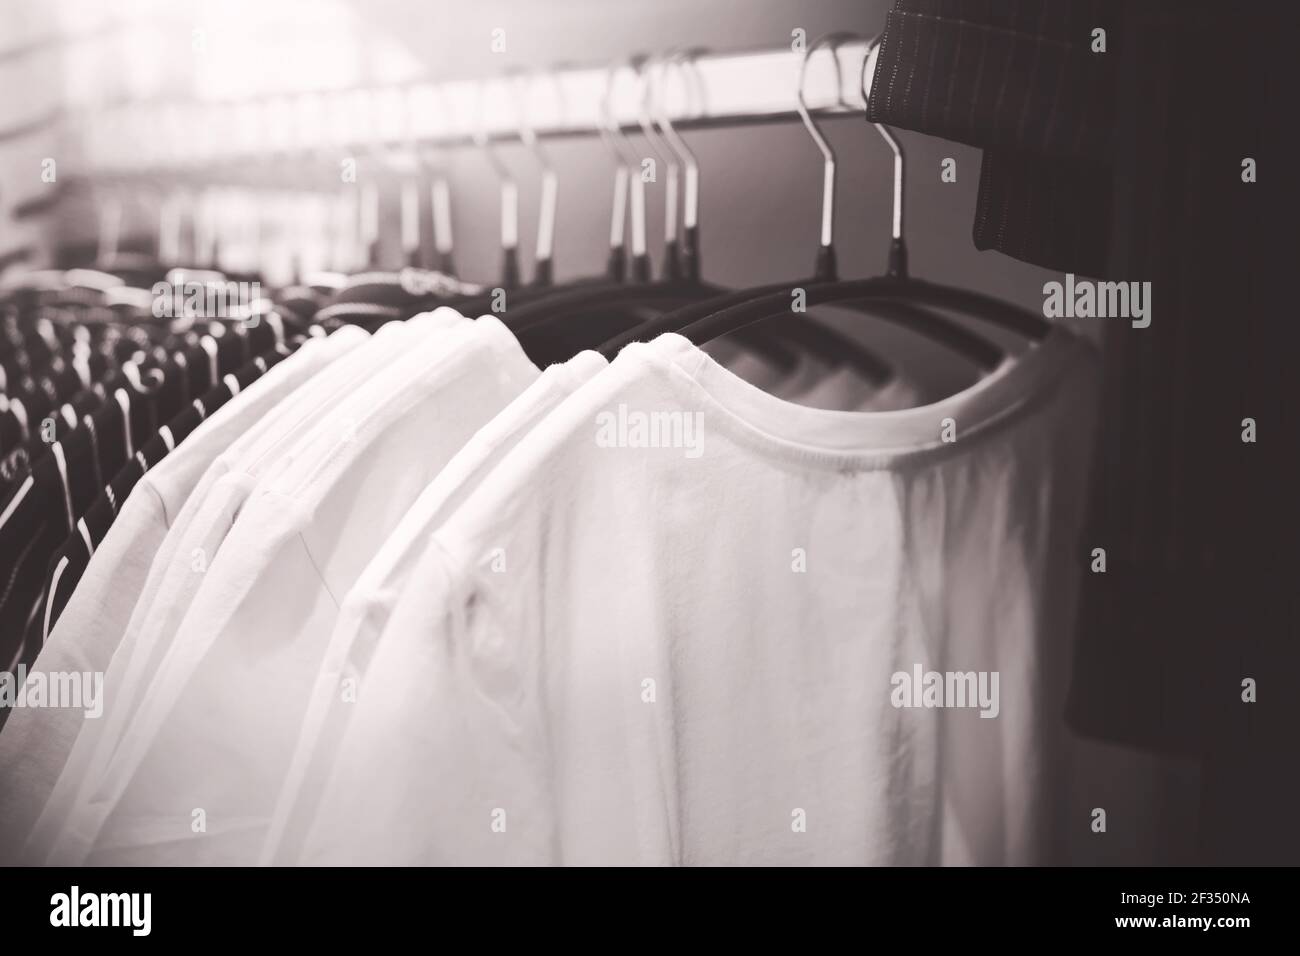 A black and white image of simple everyday T-shirts hanging on hangers in the wardrobe. Shopping in a clothing store. Stylish things. Stock Photo